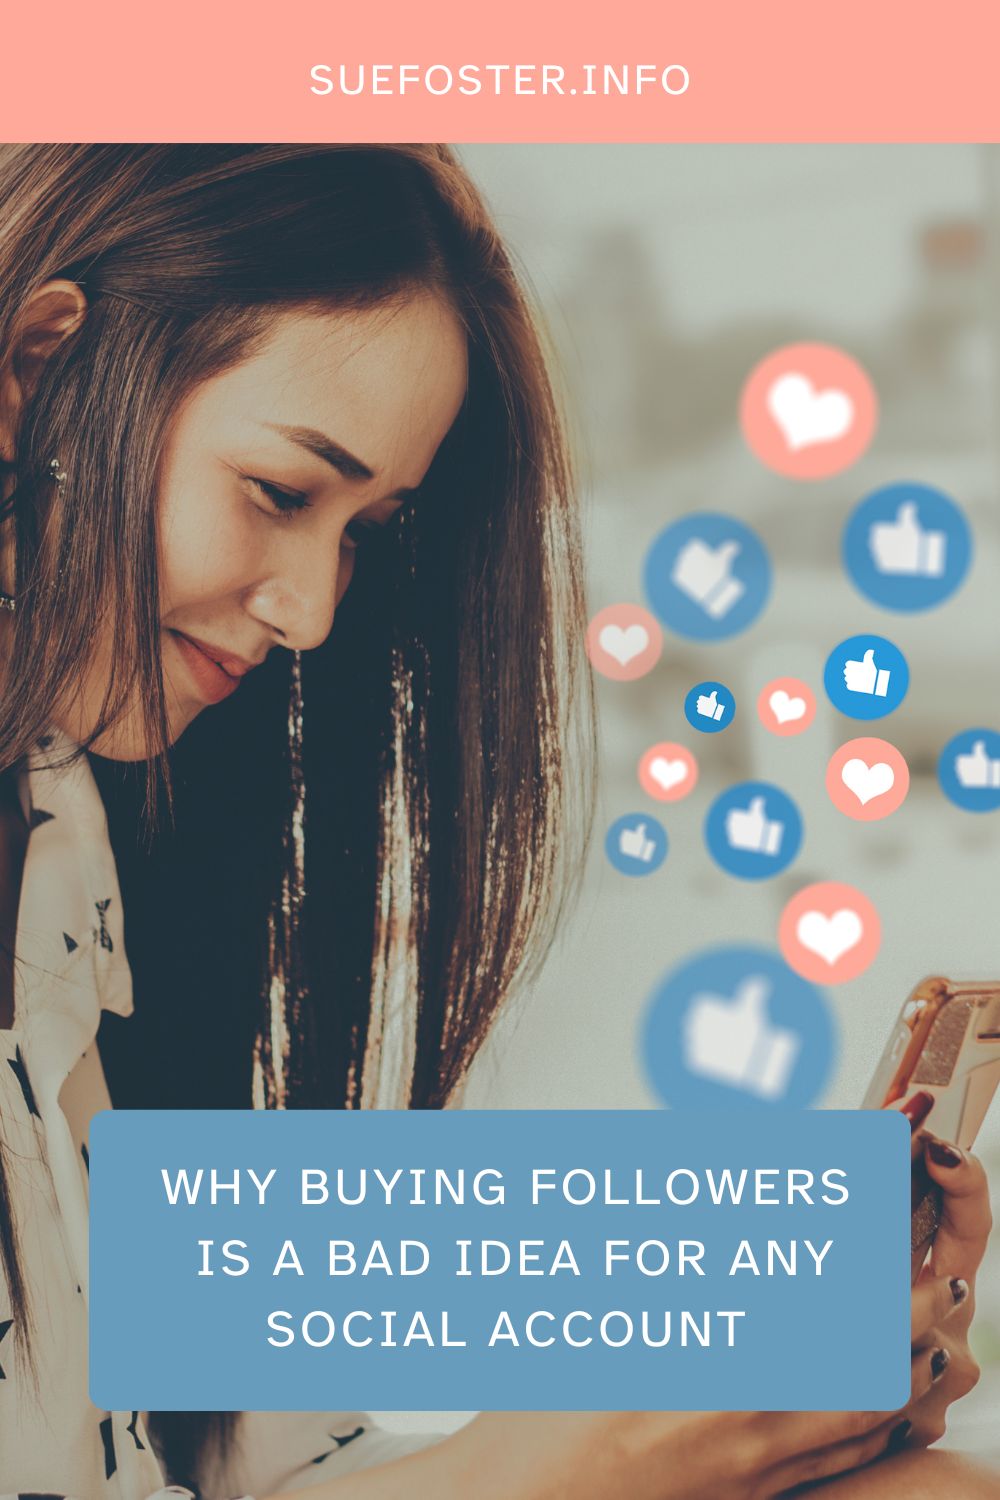 Buying followers on social media might seem tempting, but it's counterproductive. Fake followers don't engage, damage credibility, skew analytics, and risk account penalties.